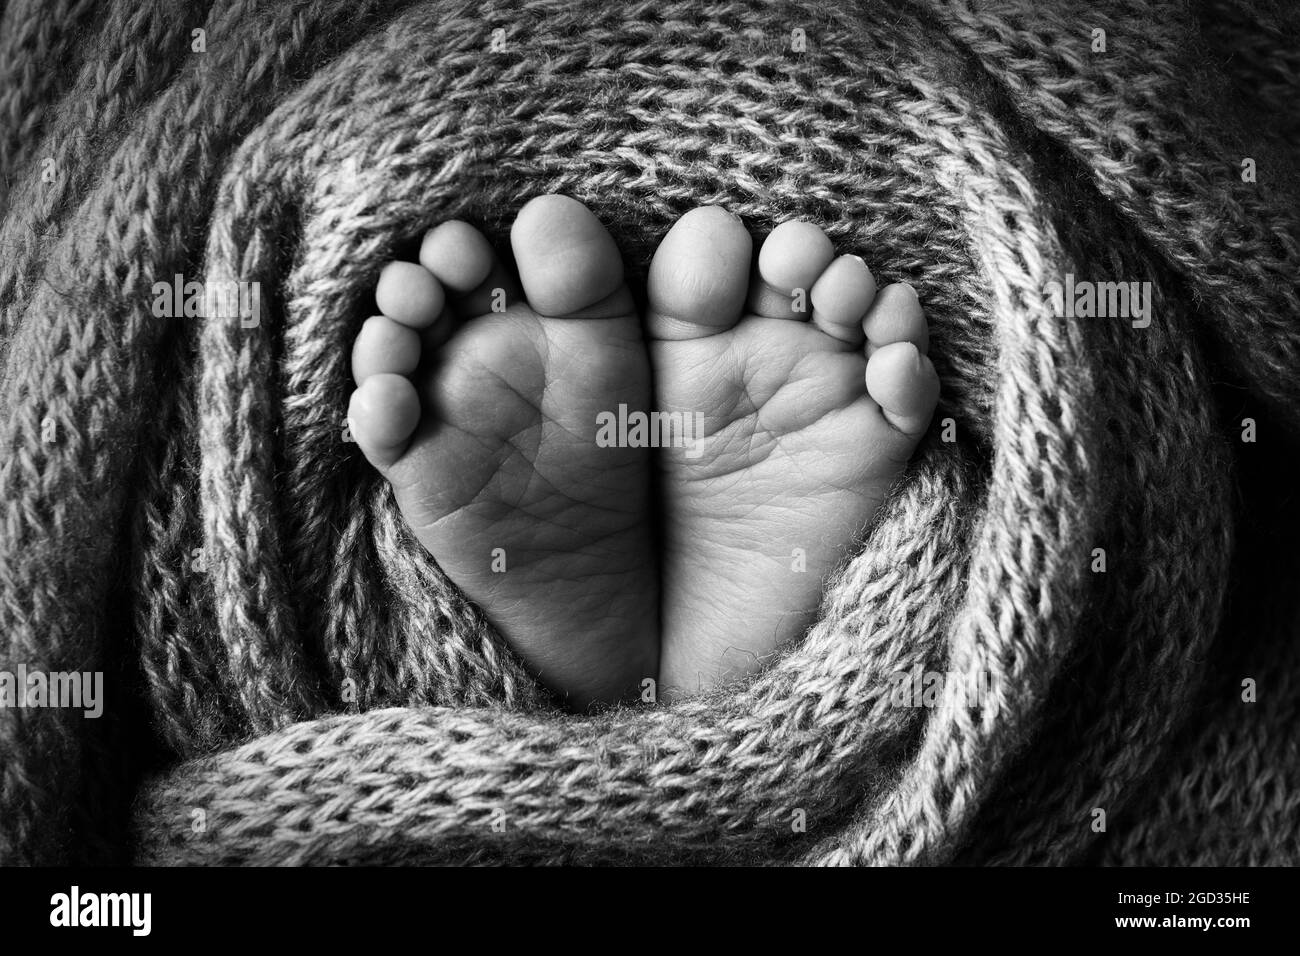 Baby's feet in a soft light blue woolen blanket. Black and white photo. Stock Photo